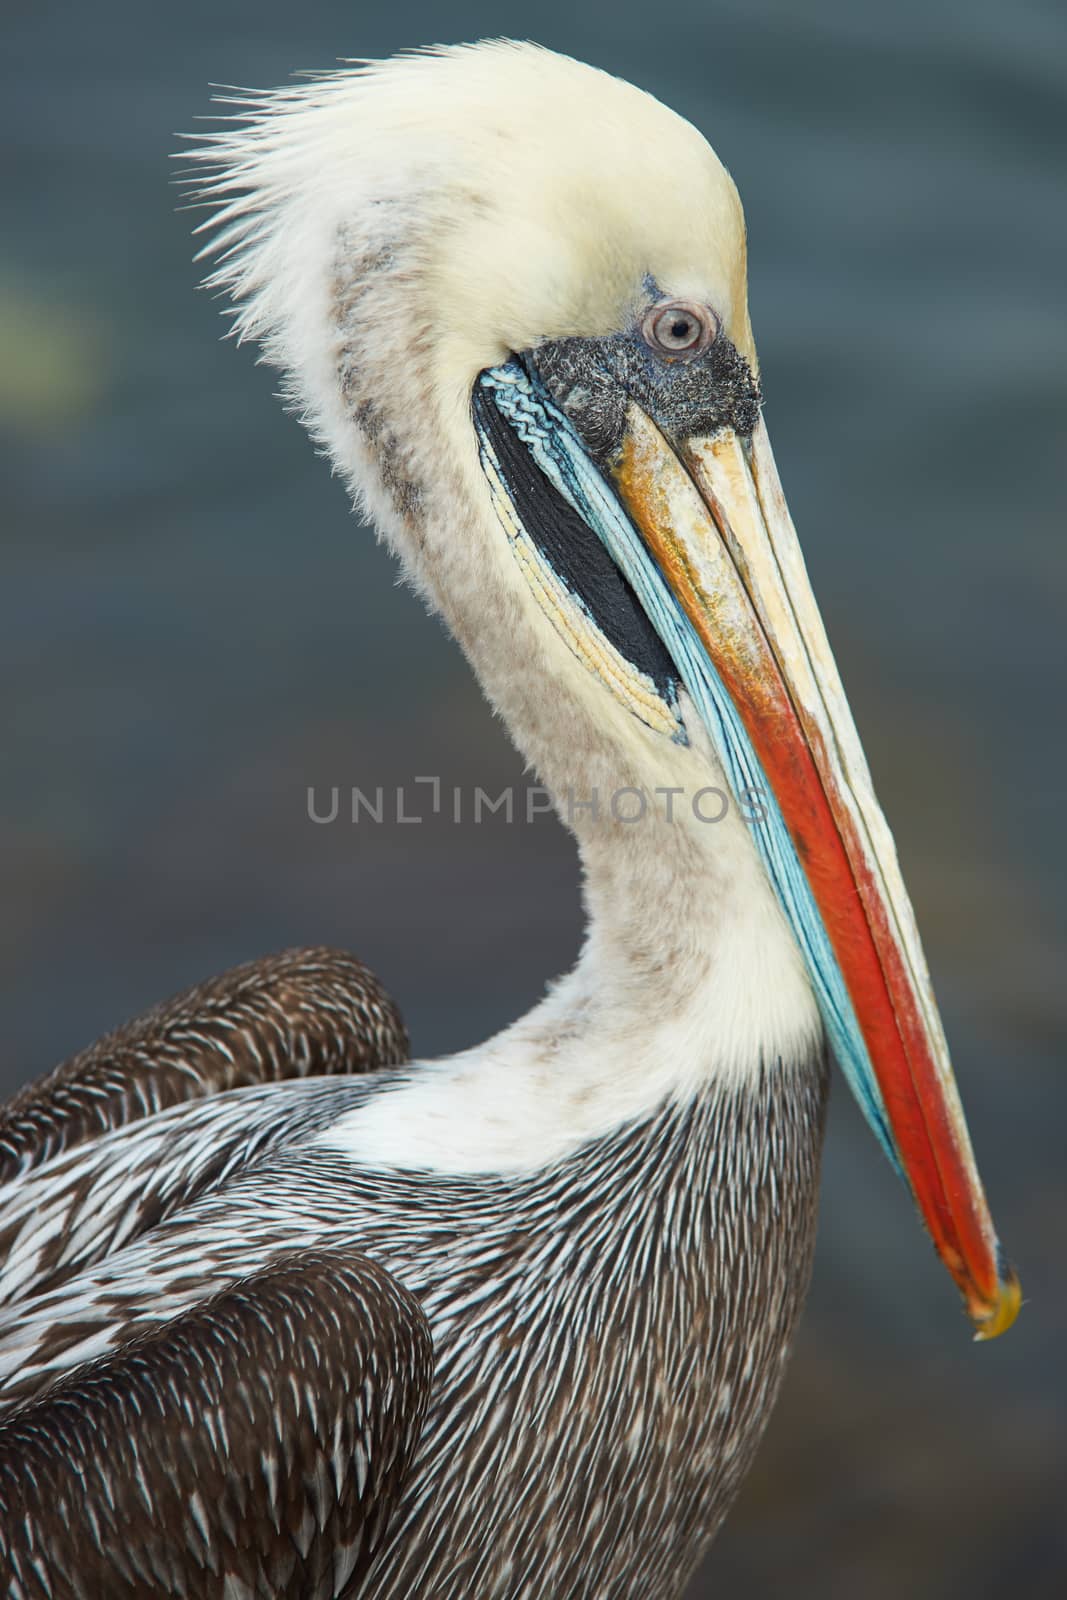 Portrait of a Peruvian Pelican (Pelecanus thagus) in the fishing harbour at Arica in Northern Chile.